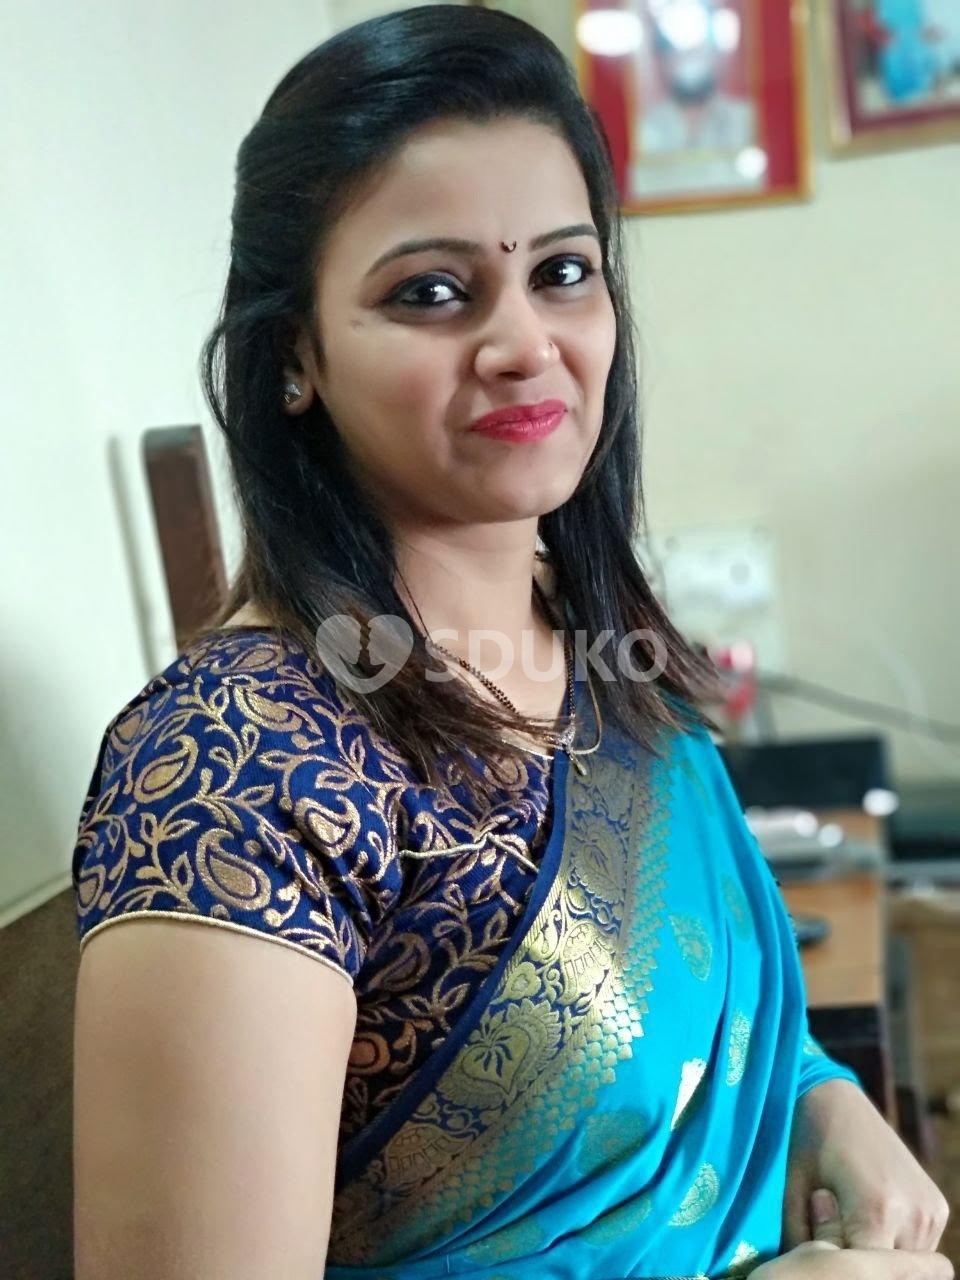 Sr nagar low price 🥰100% SAFE AND SECURE TODAY LOW PRICE UNLIMITED ENJOY HOT COLLEGE GIRL HOUSEWIFE AUNTIES AVAILABLE